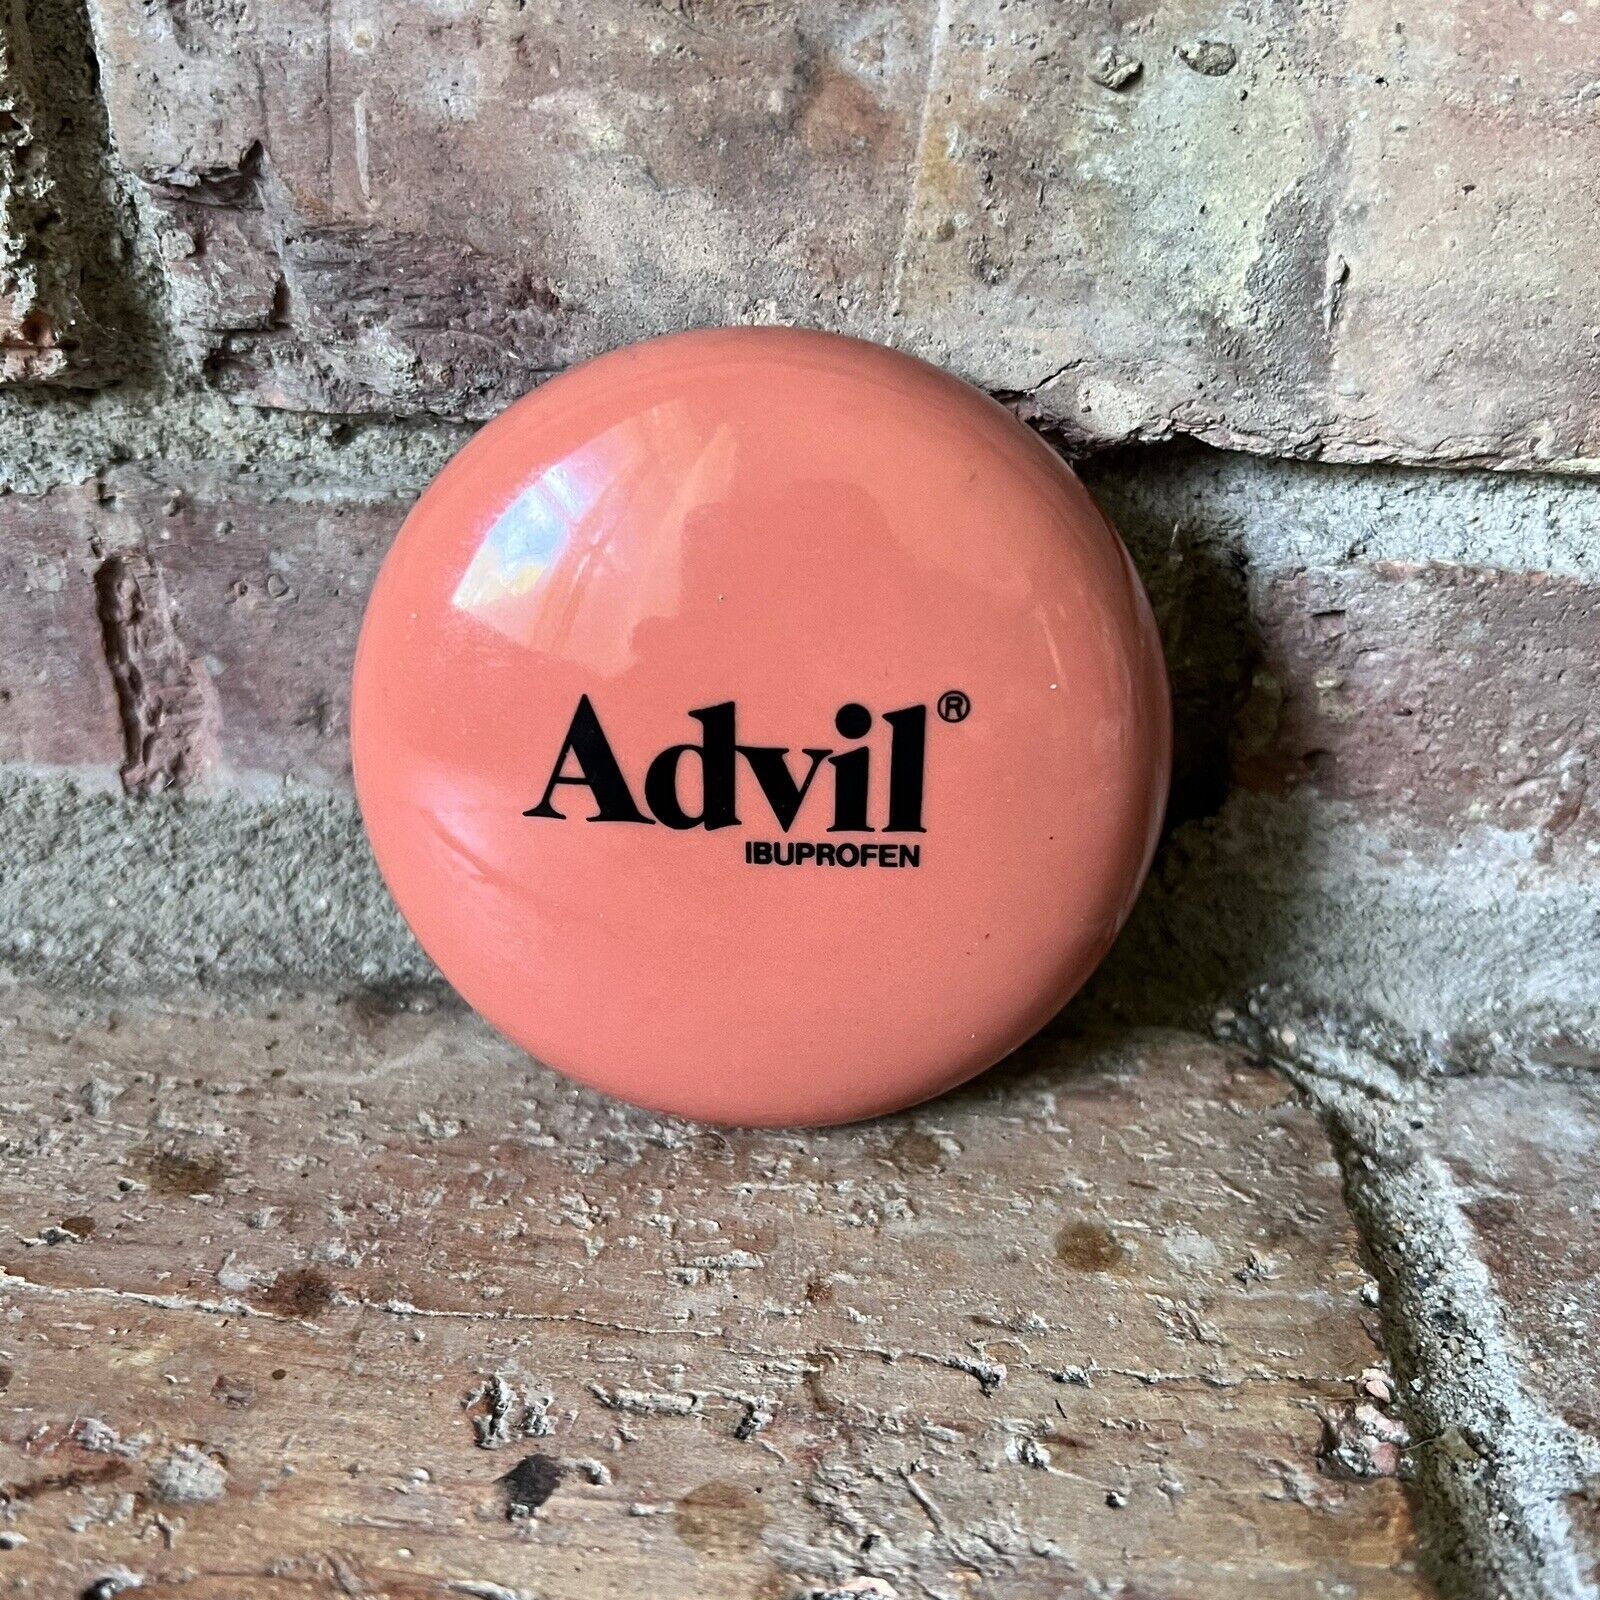 Vintage GIANT Advil Ibuprofen Ceramic Pill Advertisement Made in Japan Collect